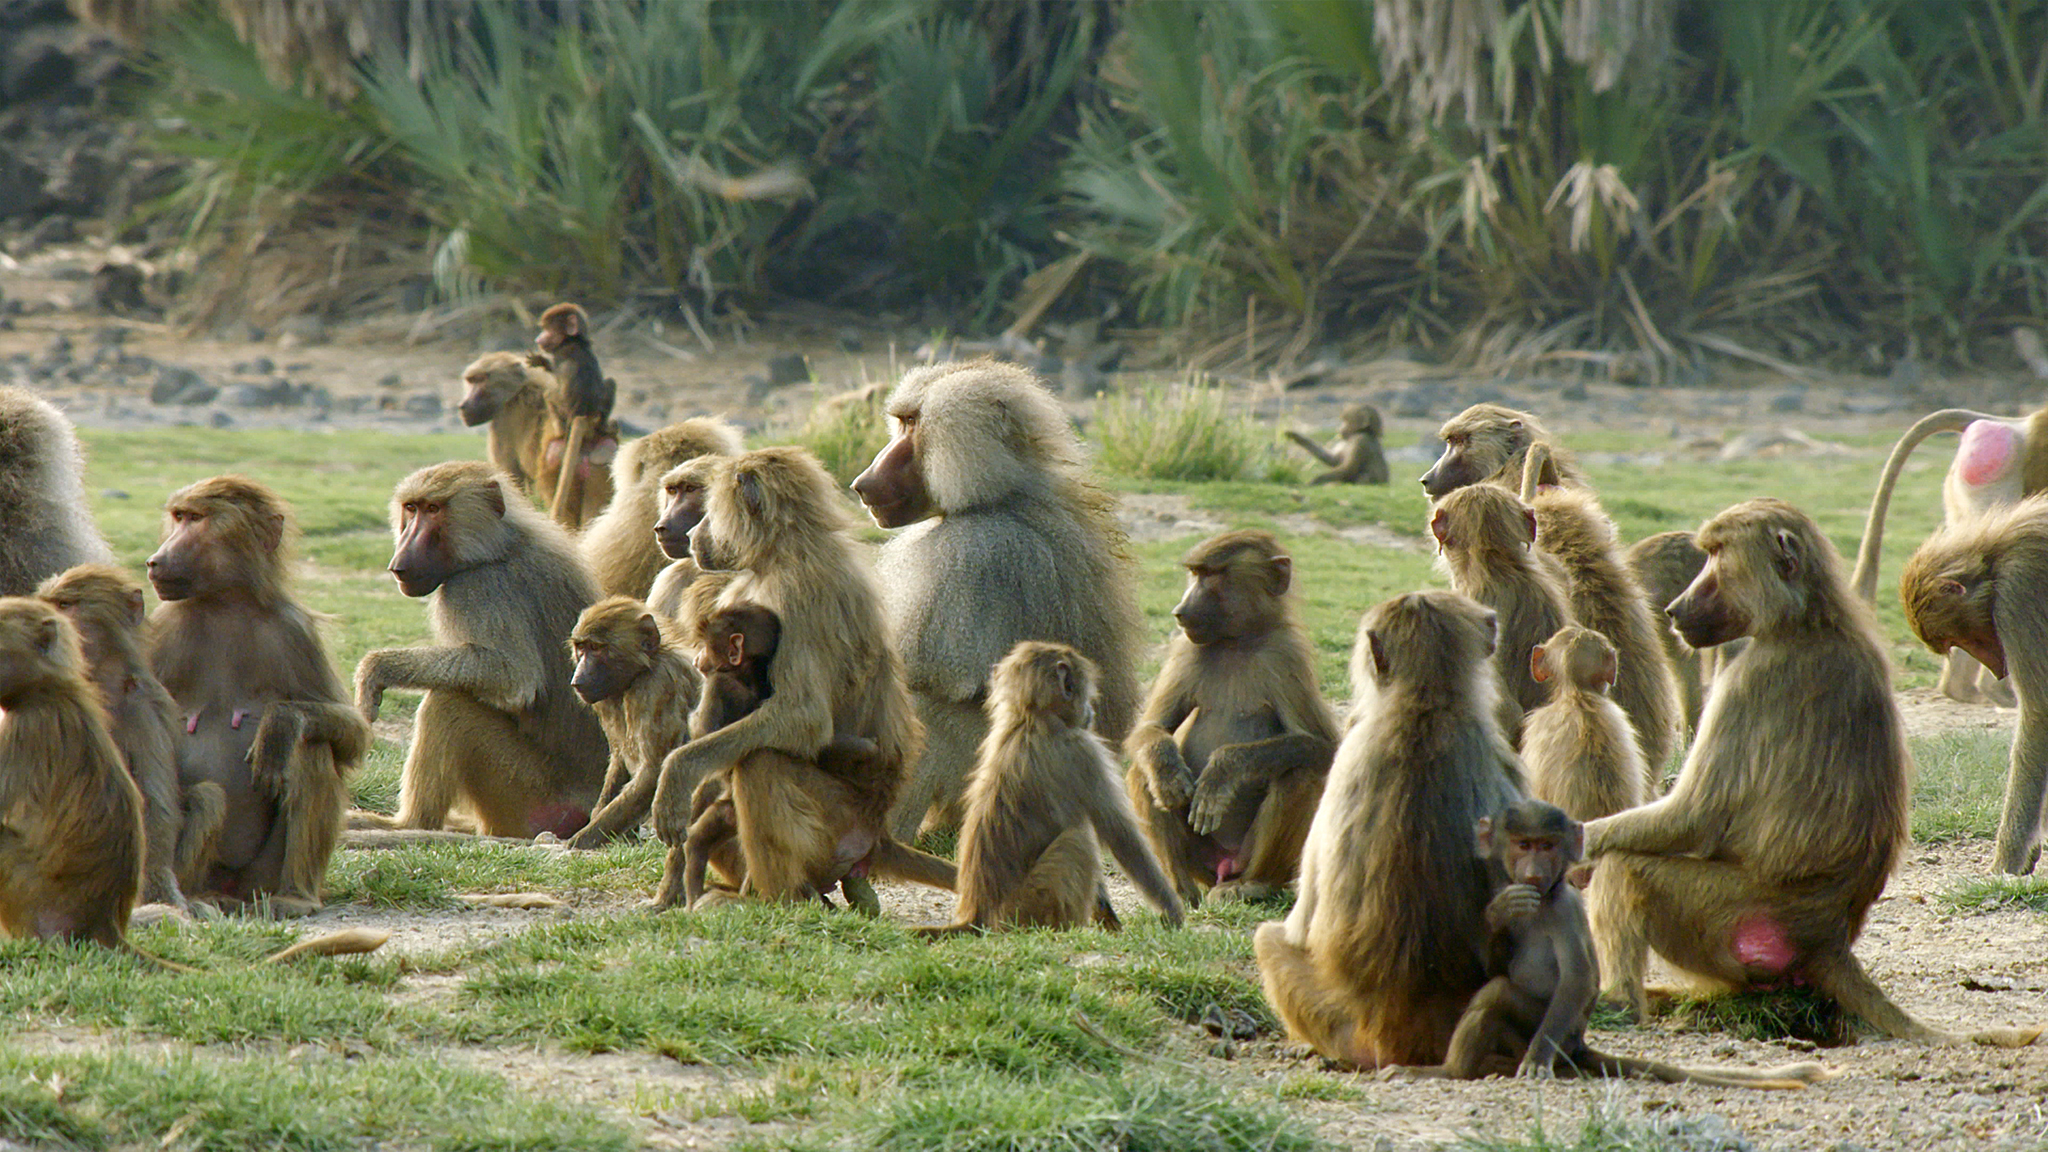 Olive Baboons